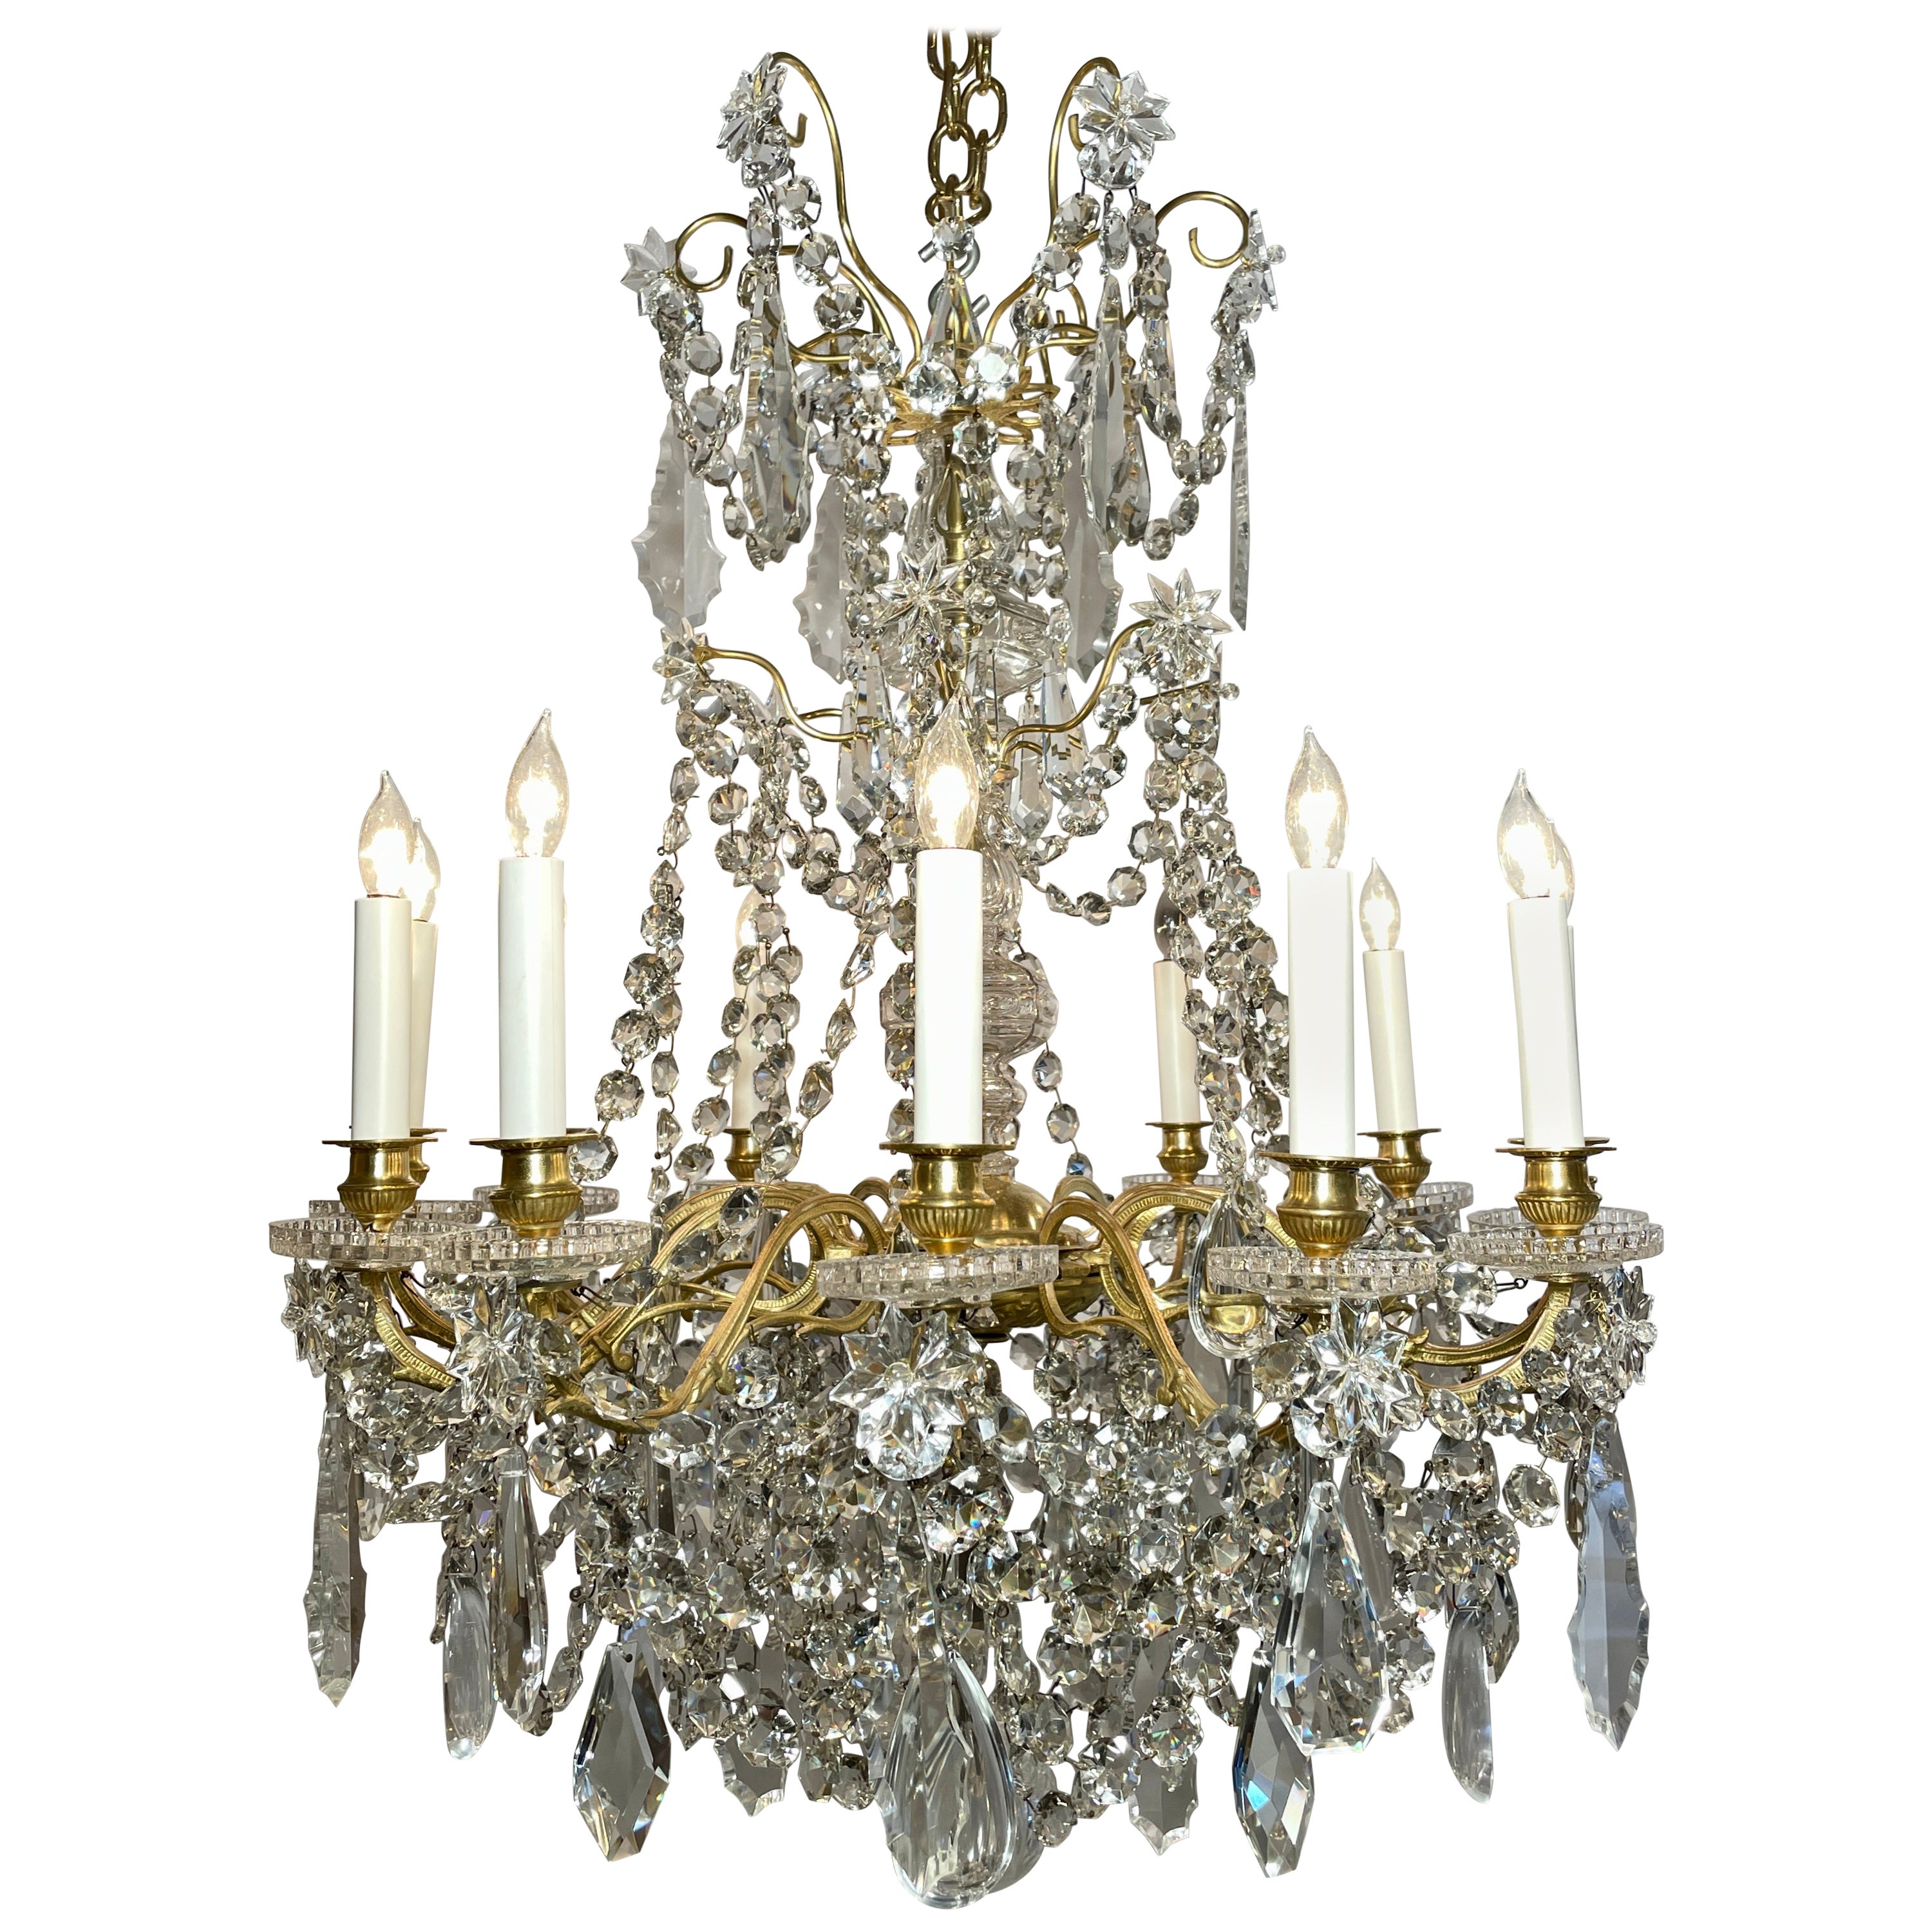 Antique French Cut Crystal and Gold Bronze 12-Light Chandelier, Circa 1875-1895. For Sale